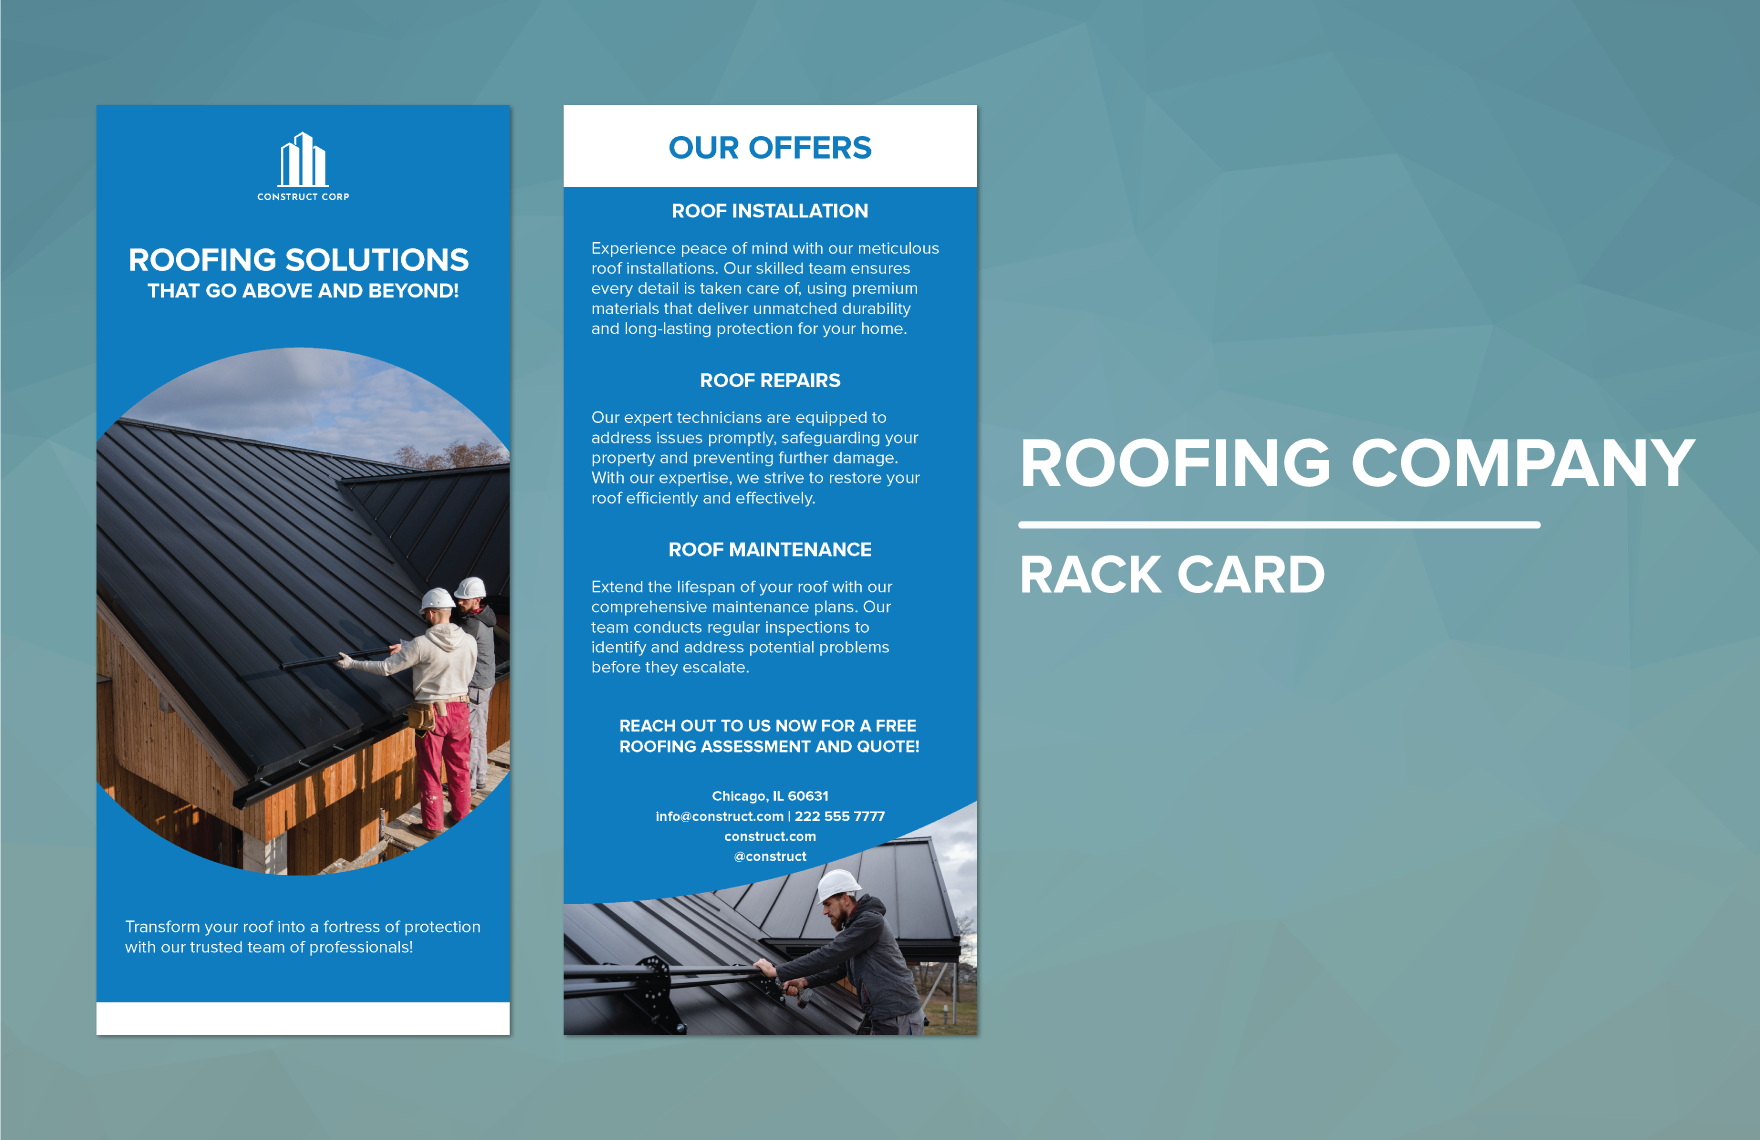 Roofing Company Rack Card